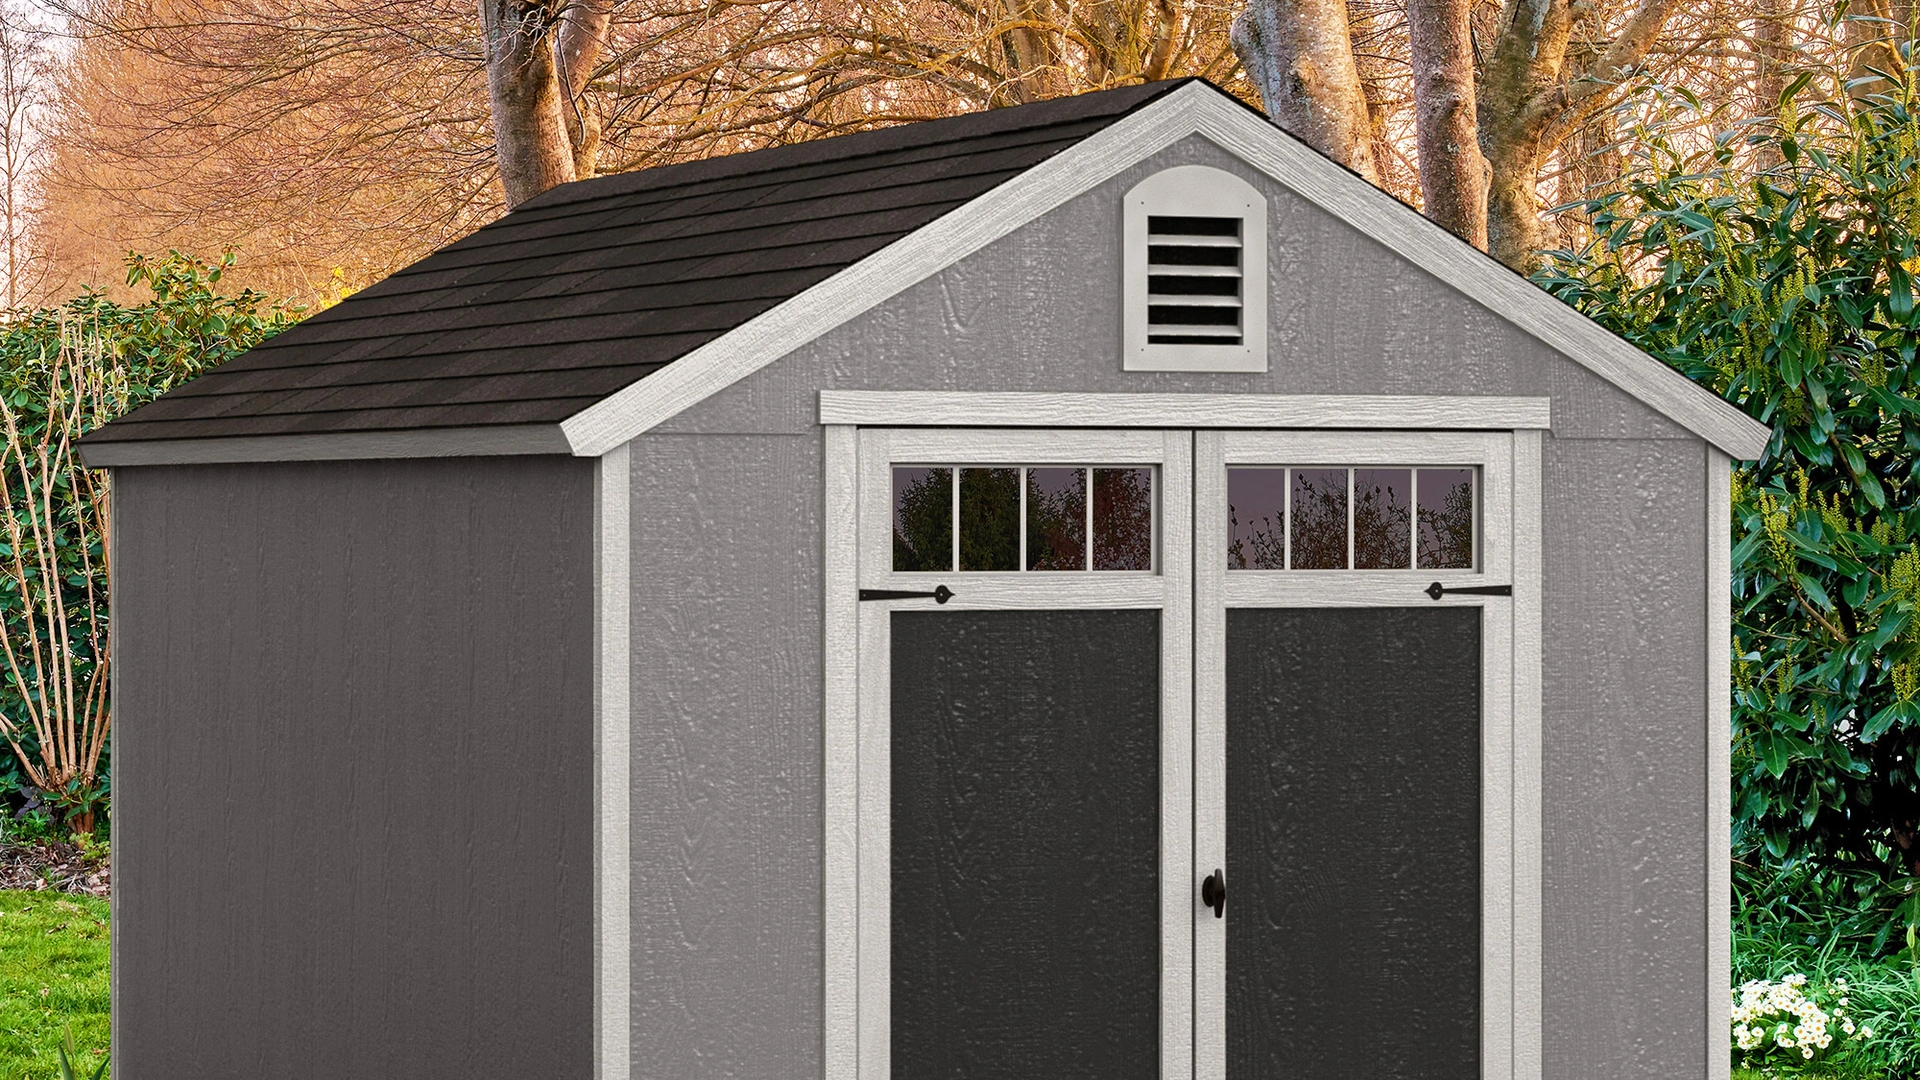 Save $500 off this handy backyard shed at Costco